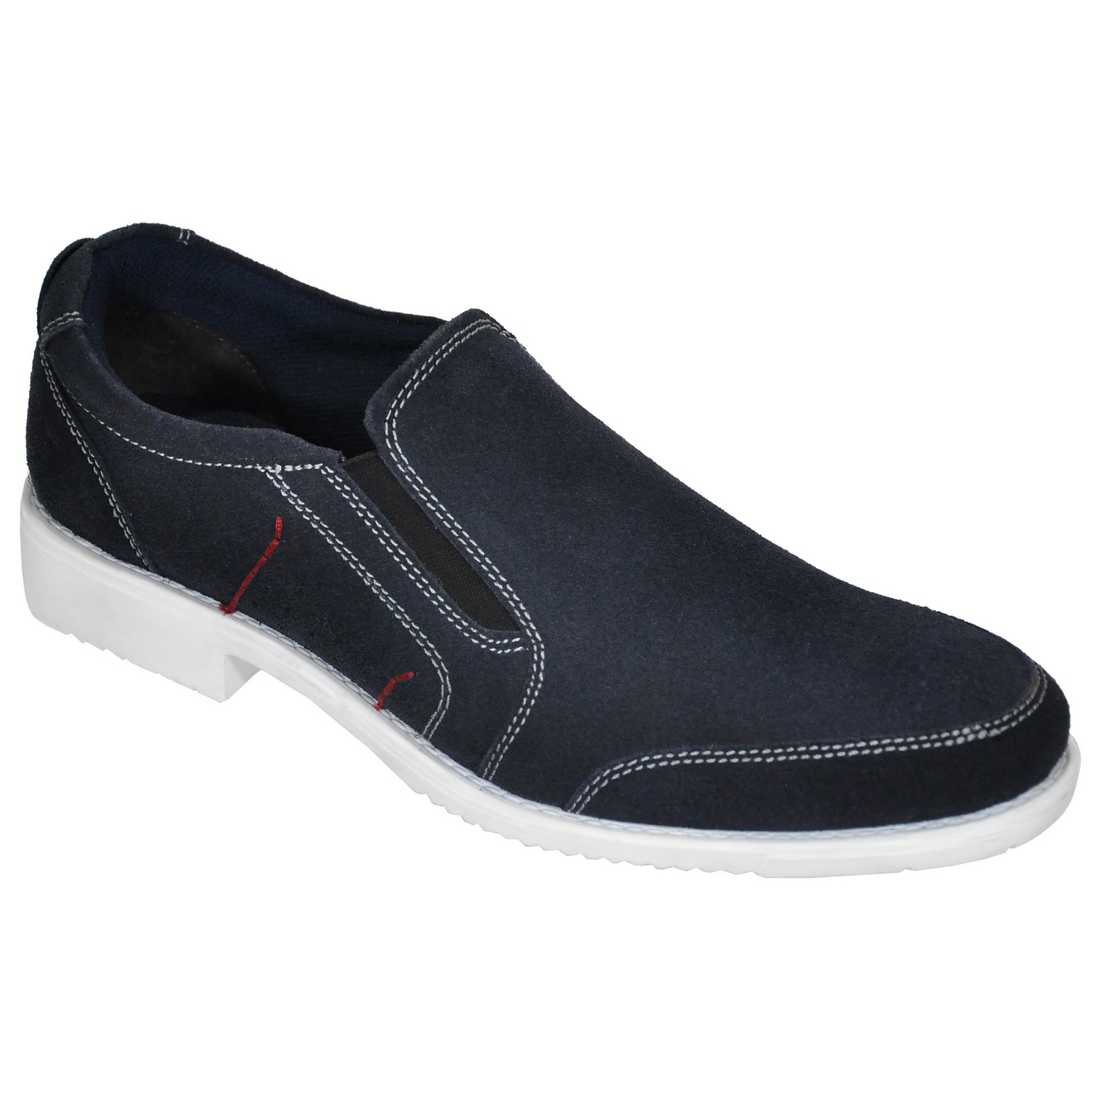 OHM New York American Lifestyle Vamp Stitched Leather Slip-on Shoes